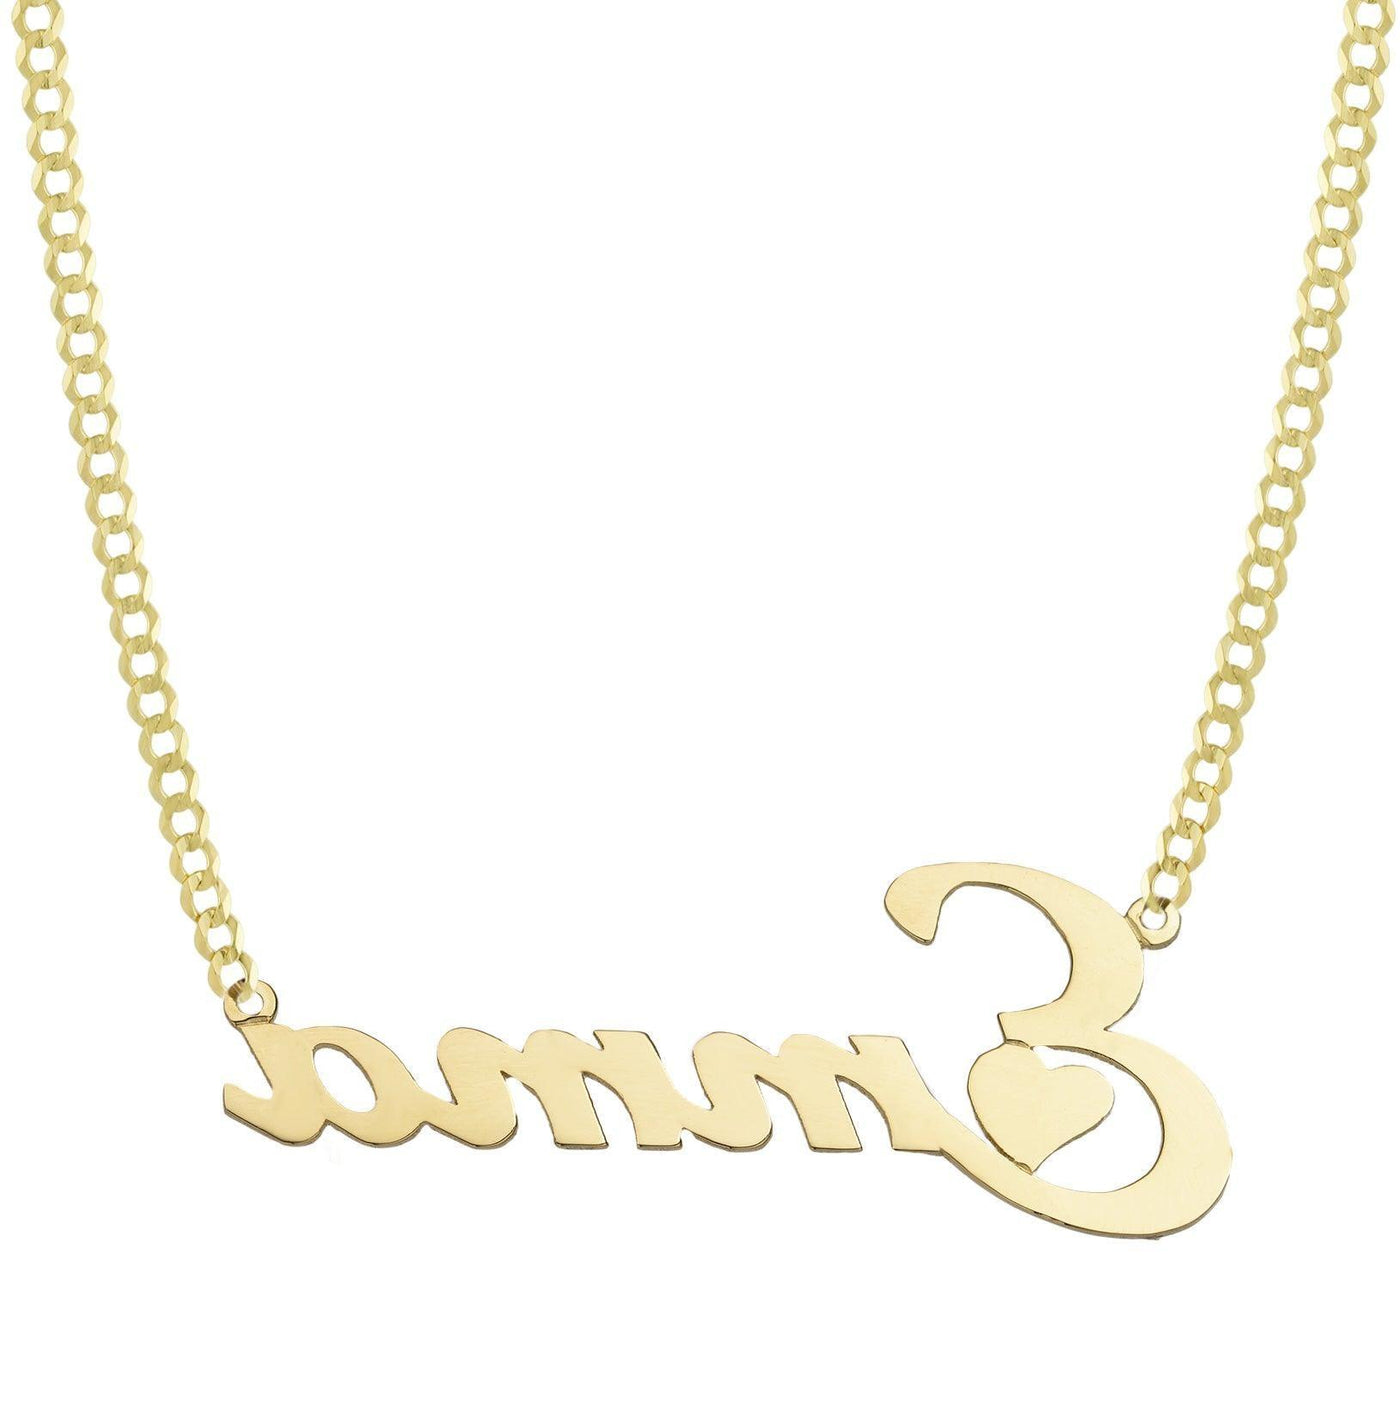 Ladies Script Name Plate Heart Necklace 14K Gold - Style 9 - bayamjewelry